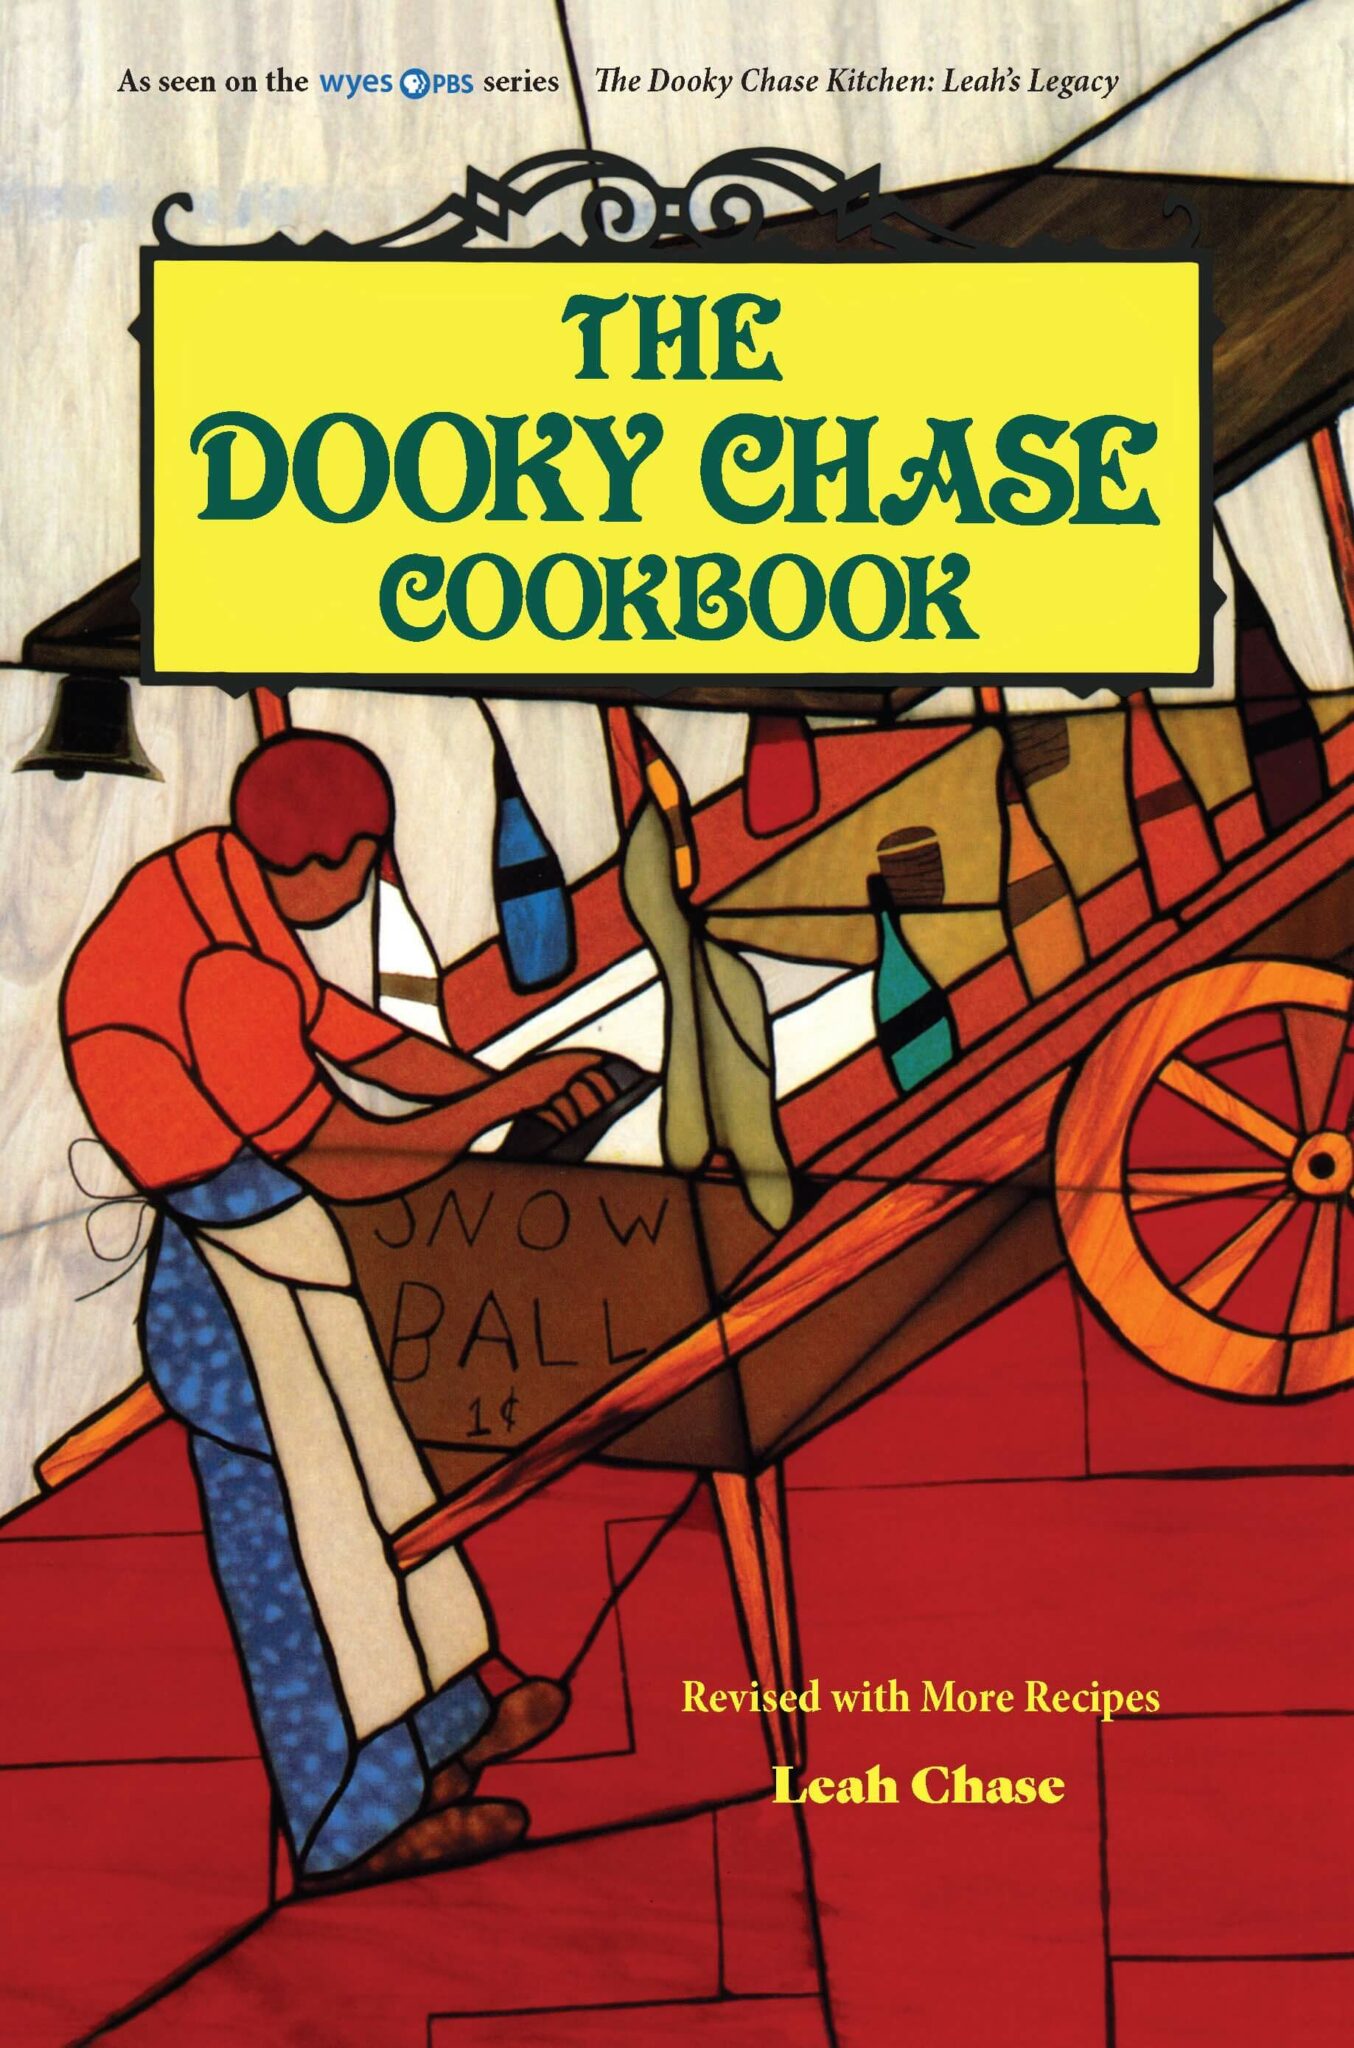 Shop THE DOOKY CHASE KITCHEN LEAH’S LEGACY by WYES